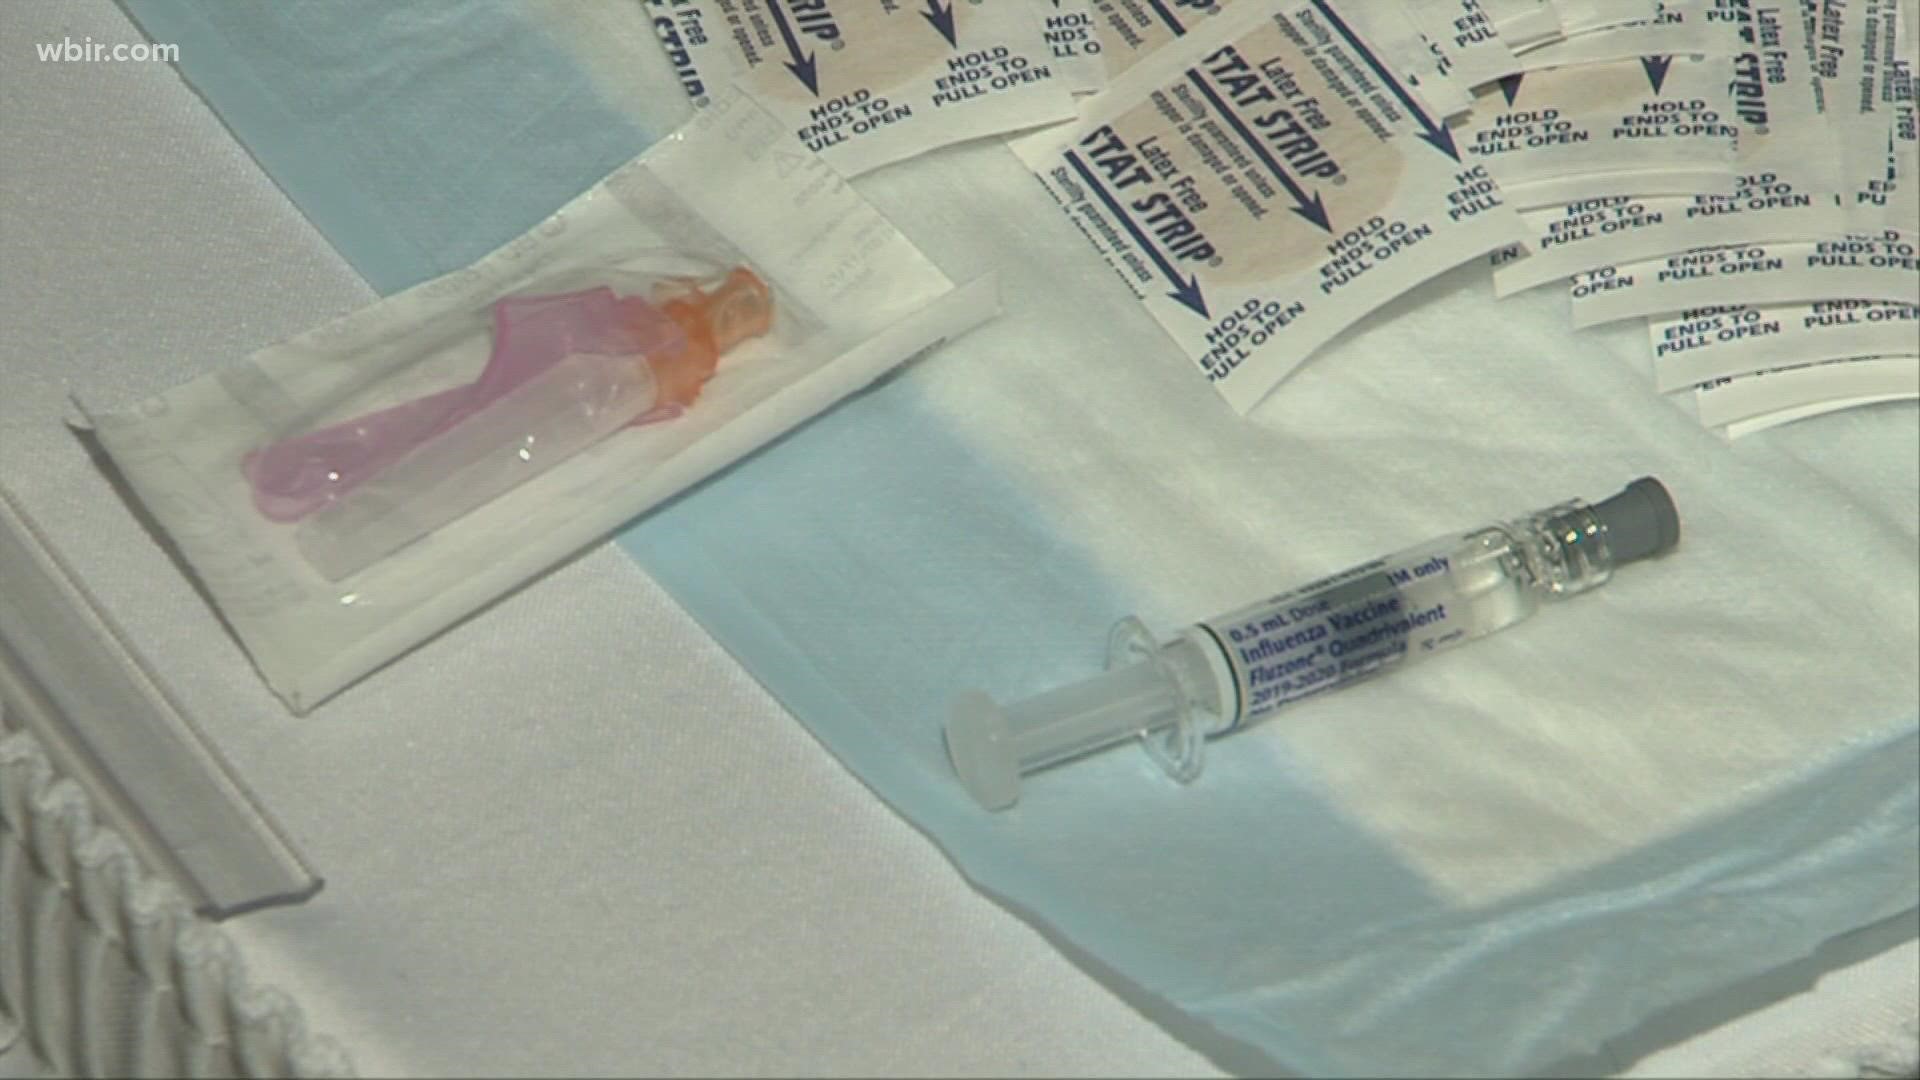 The Knox County Health Department said flu shots, flu mists and high-dose flu vaccines will be available at their clinics.